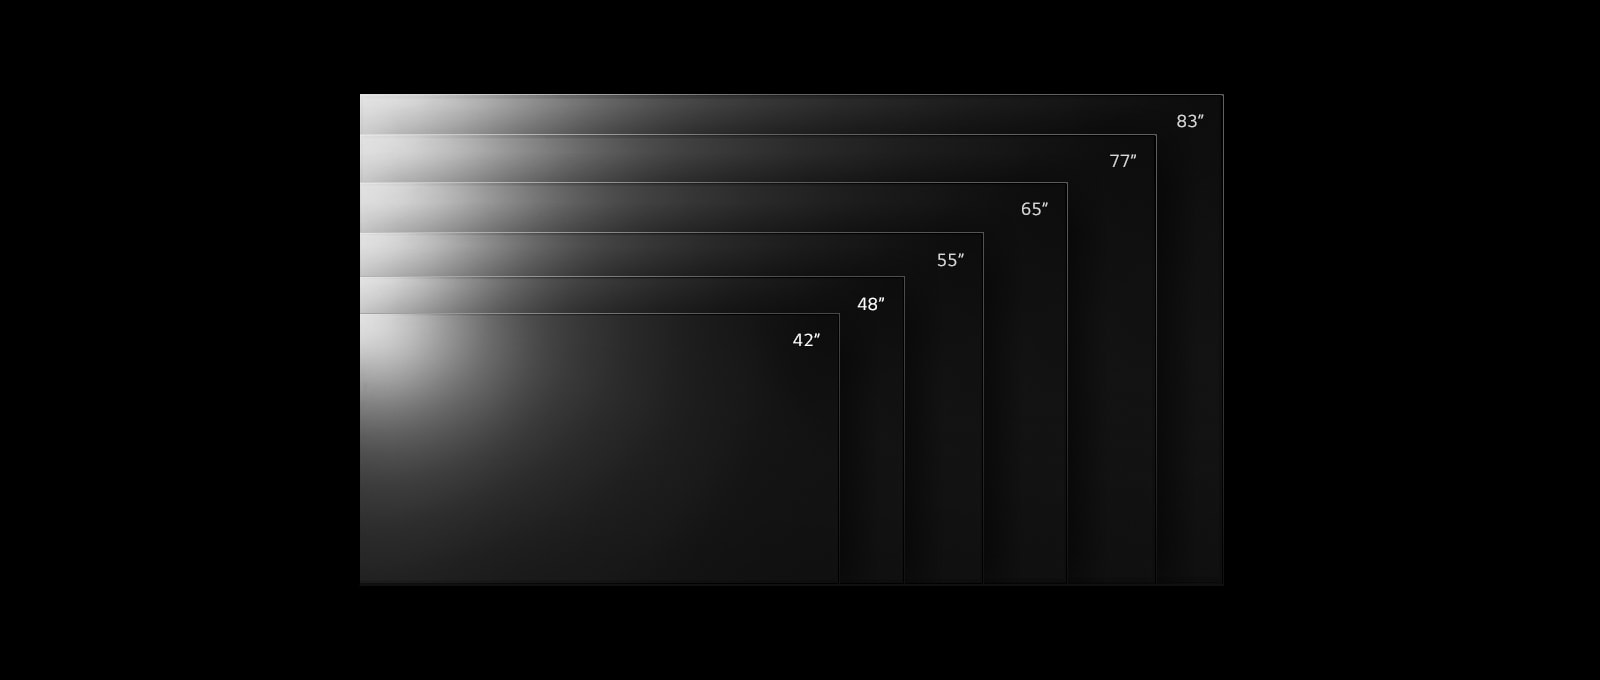 LG OLED C2 TV lineup in various sizes from 42 inches to 83 inches.